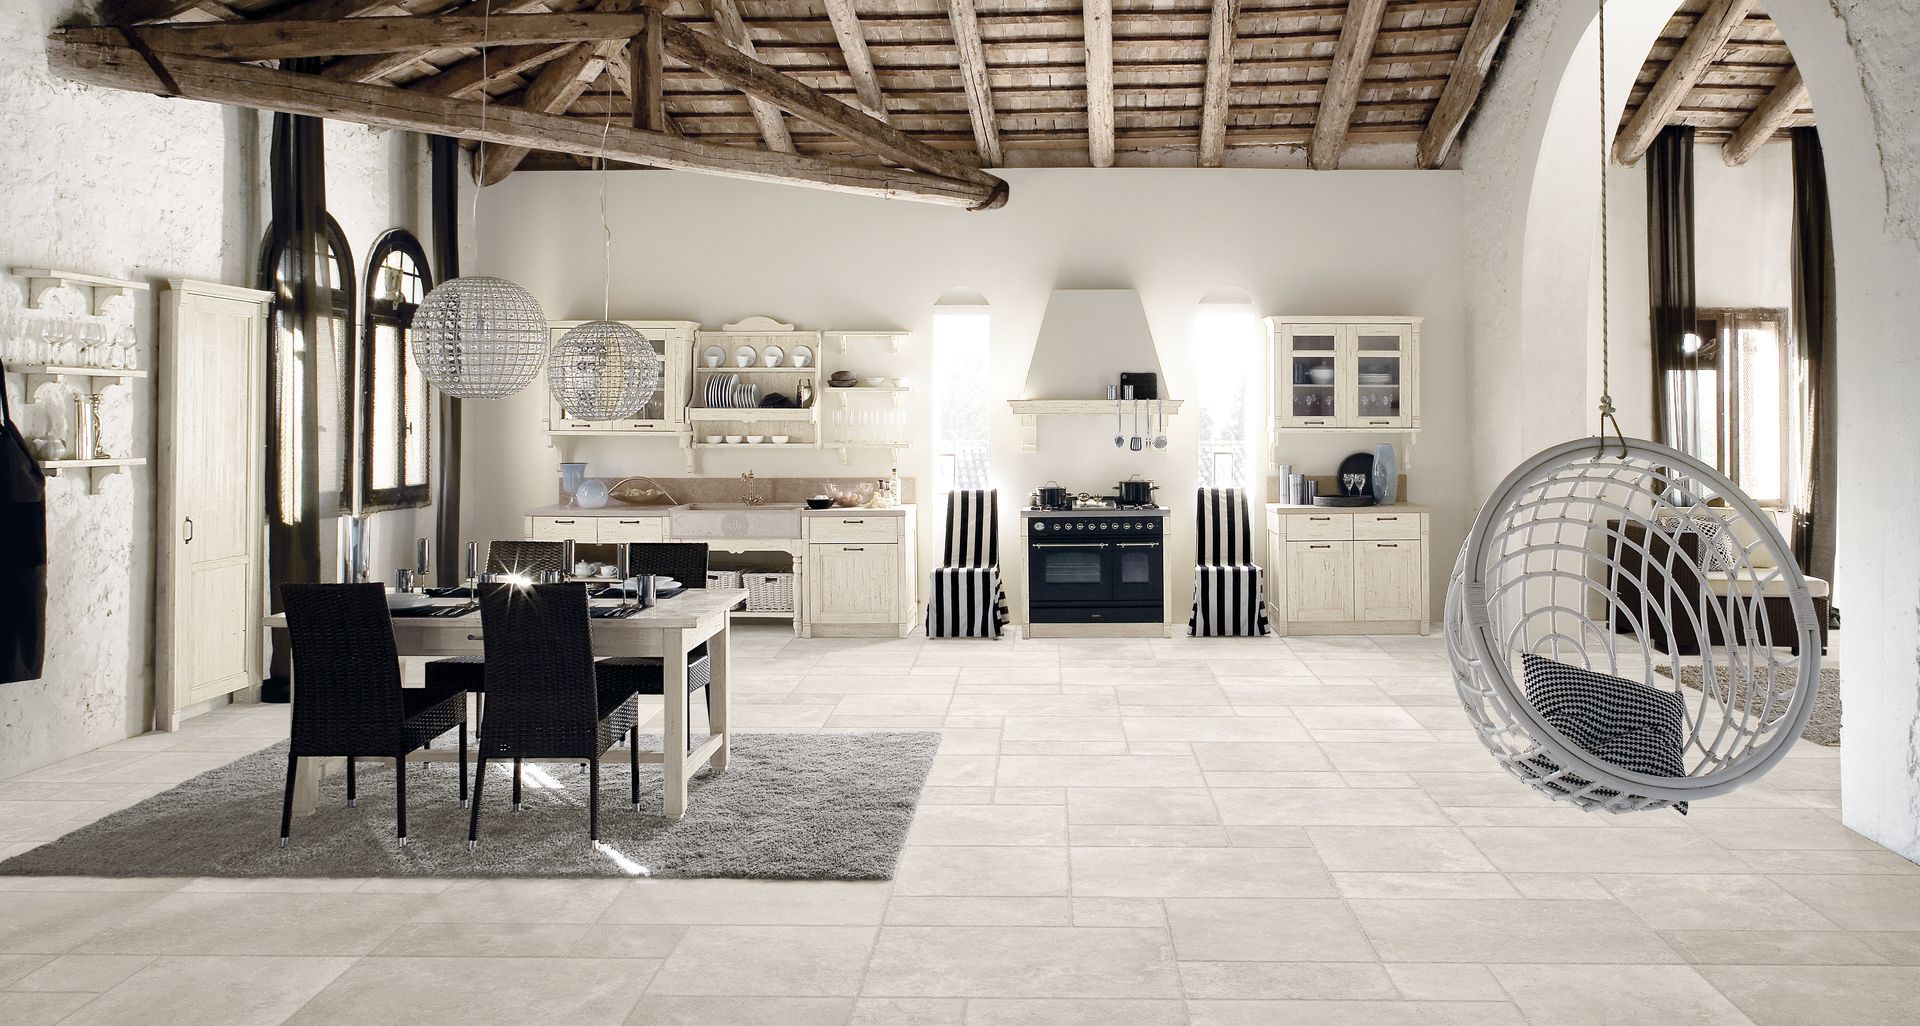 limestone effect tiles used in an open floor tile with a swing tile with wooden beam ceilings